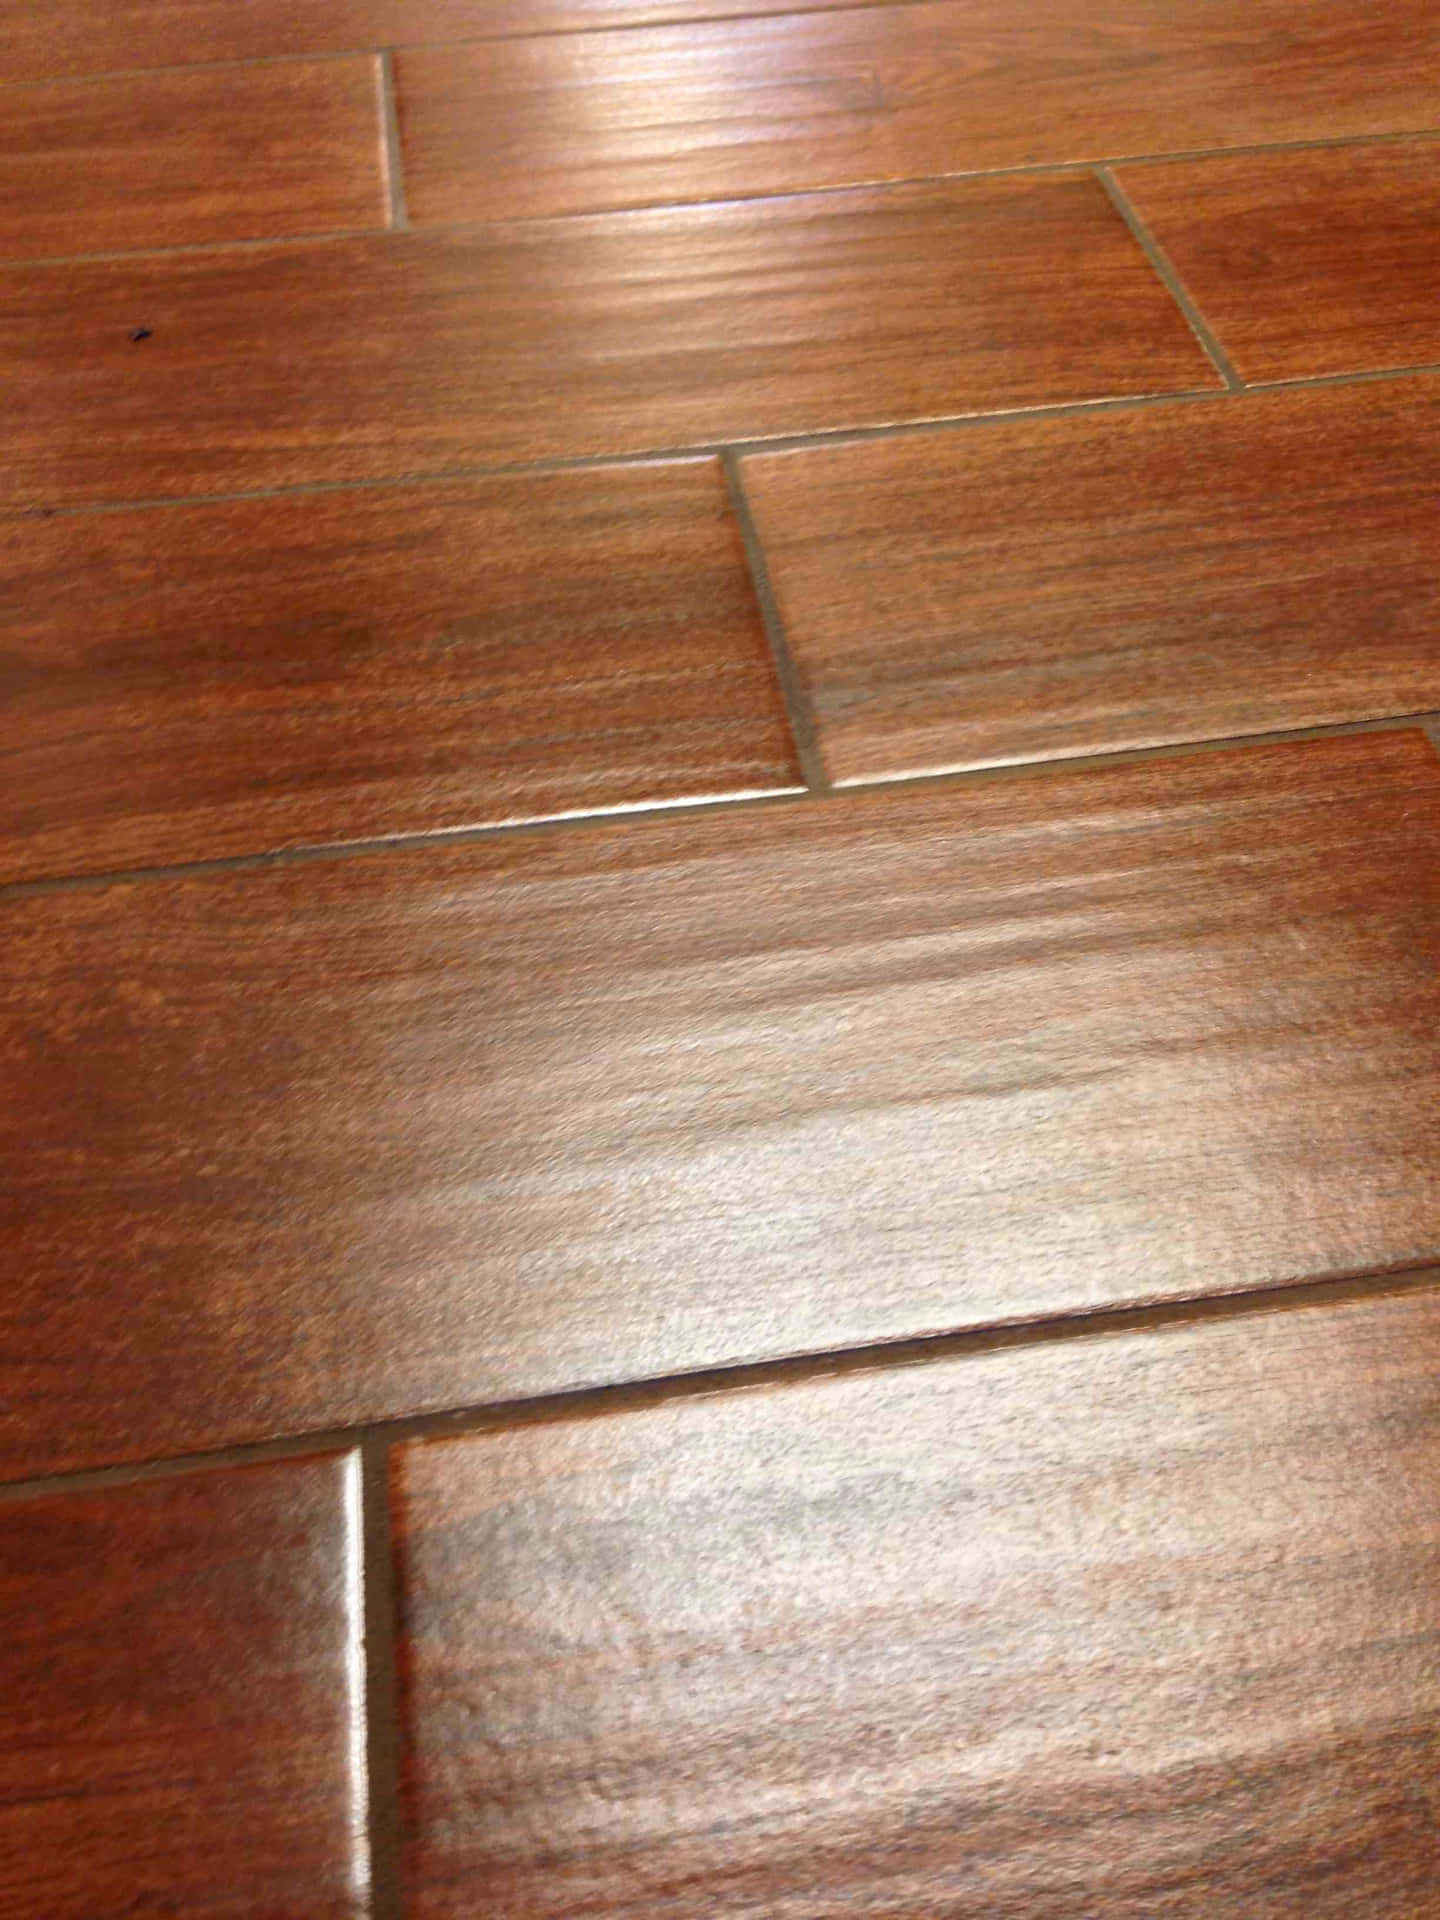 A Close Up Of A Wooden Floor With Brown Tiles